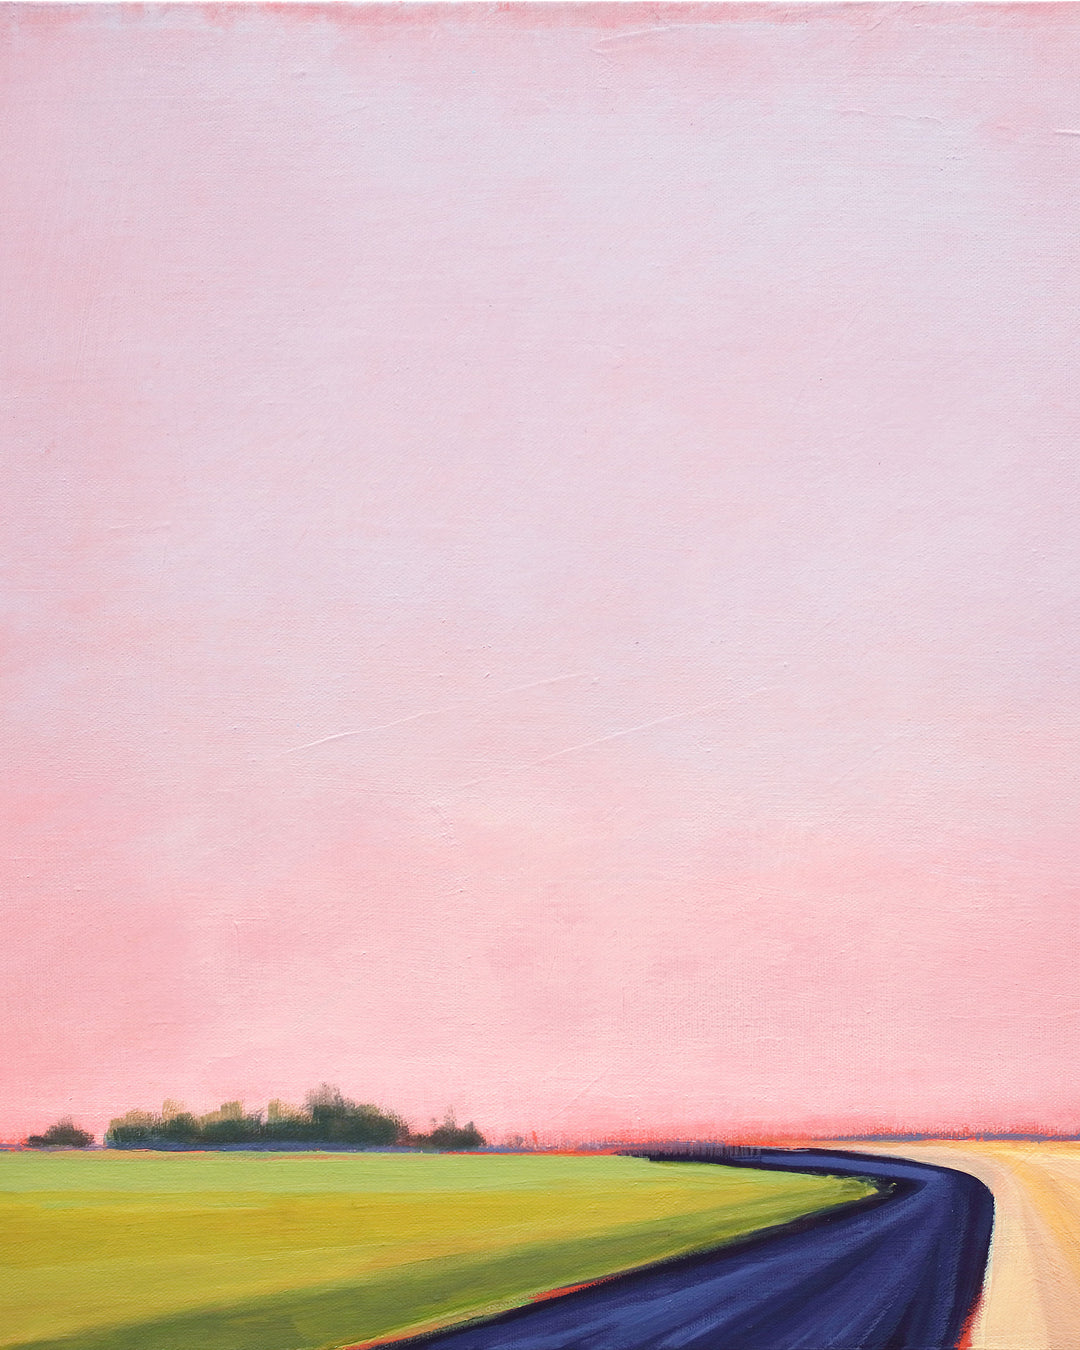 Abstract scene of a curvy country road with green fields and a pink sky.